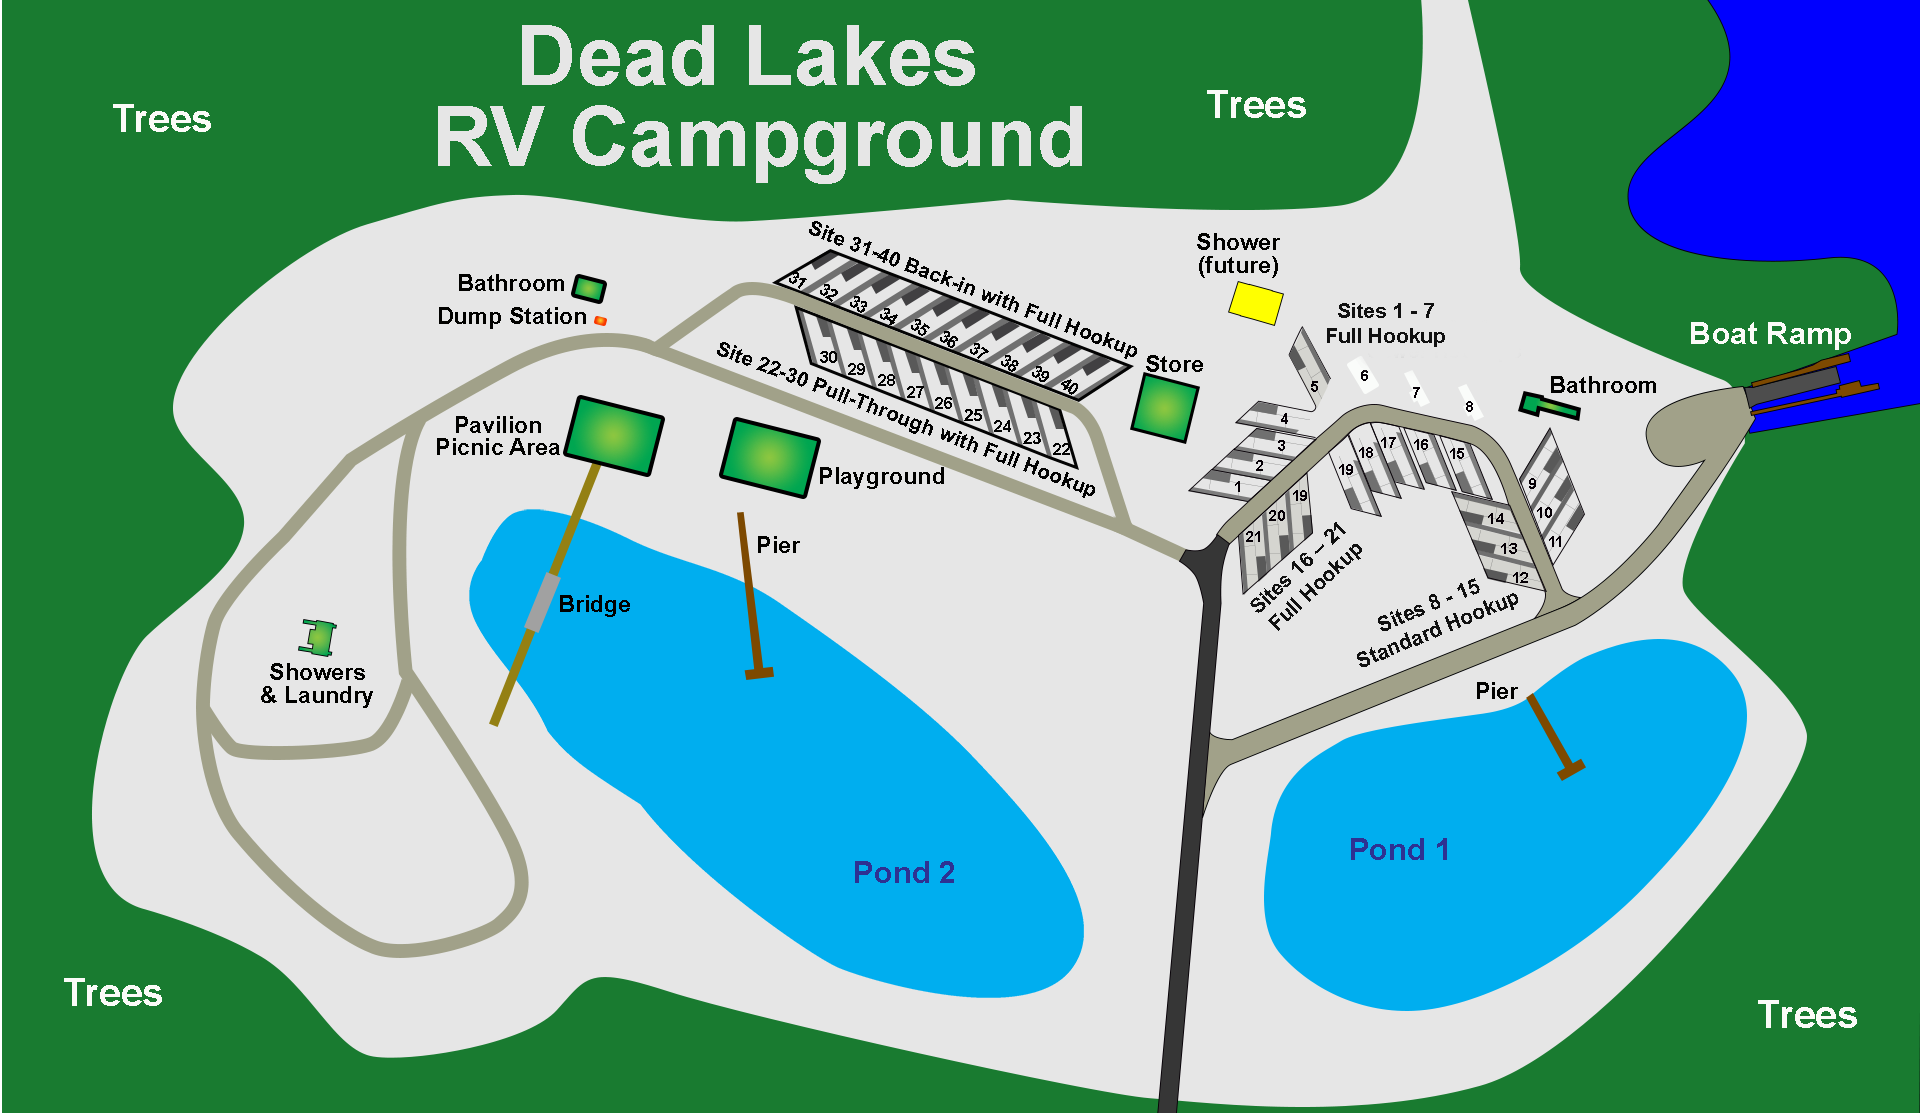 Dead Lakes RV Campground Map